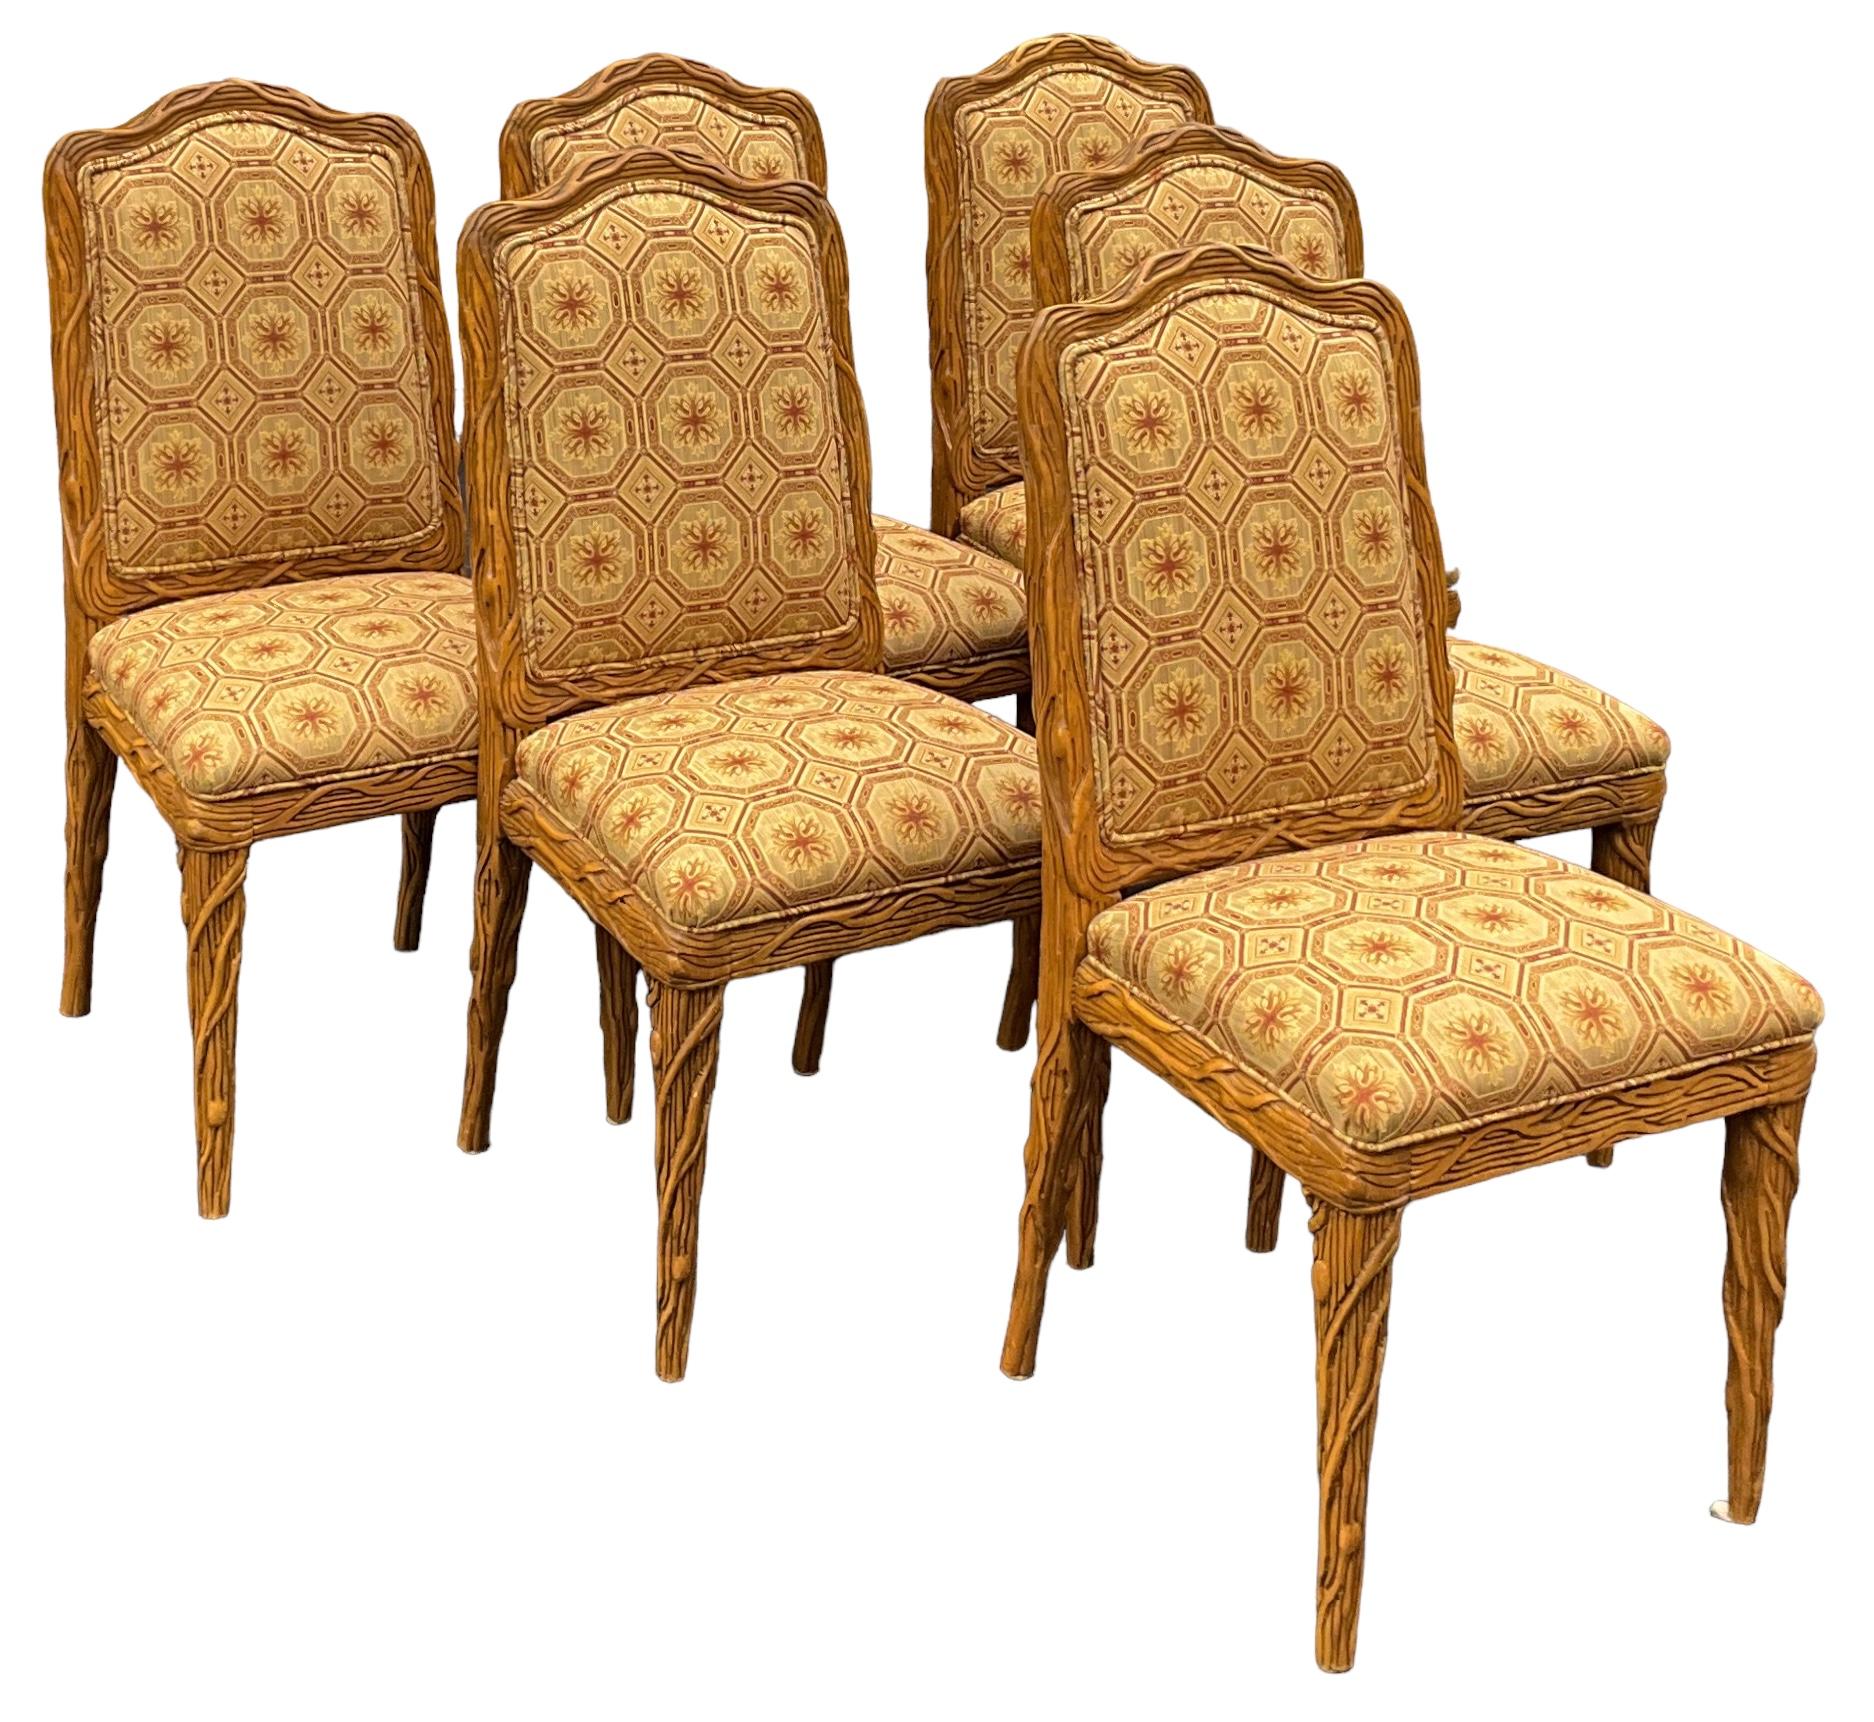 Dennis & Leen Style Carved Wood Faux Bois Dining Side Chairs - S/6 In Good Condition For Sale In Kennesaw, GA